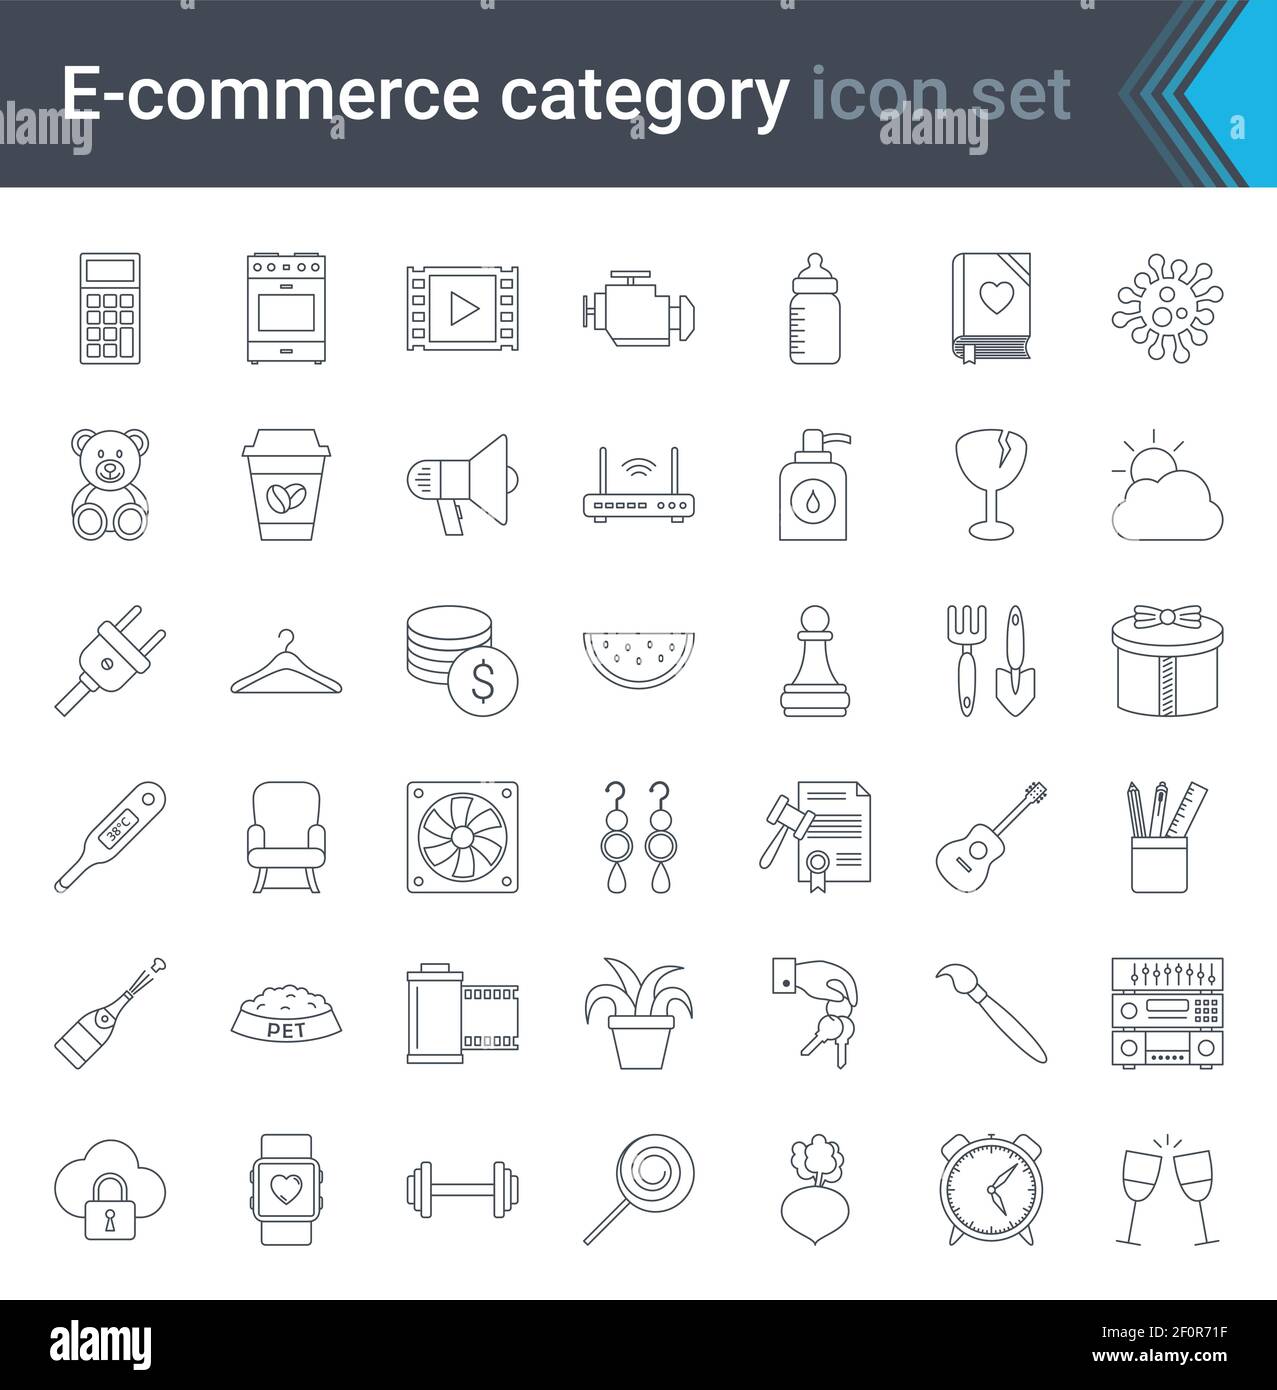 Shop category outline icons set. Shopping and e-commerce thin line icons Stock Vector